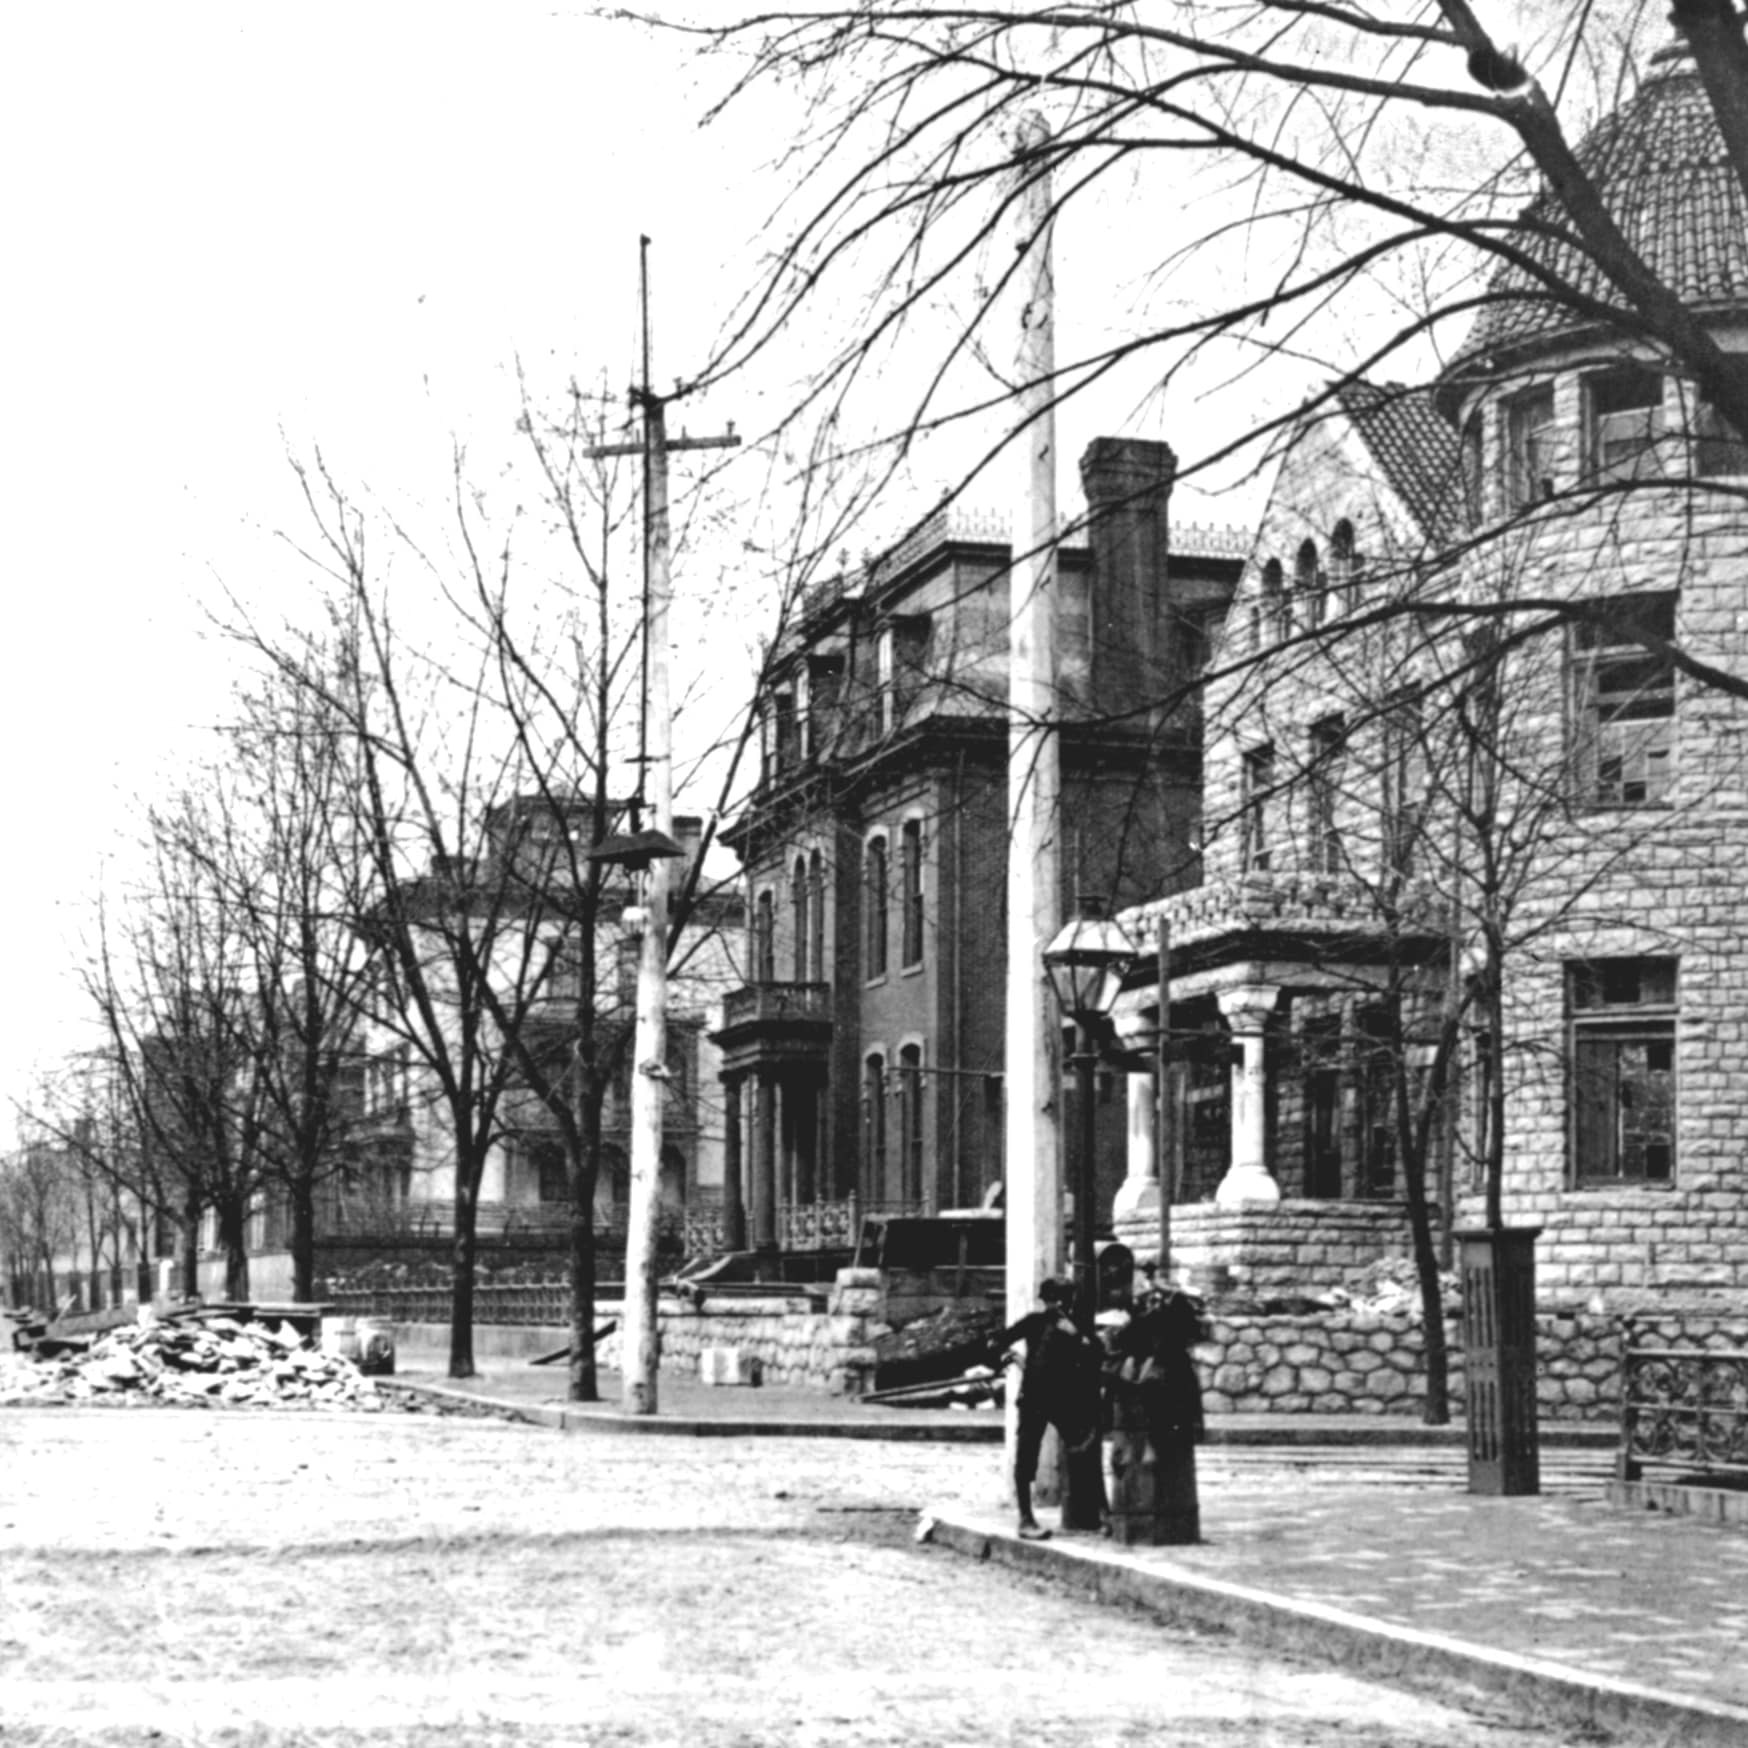 A photo of the houses on Franklin Street from 1891. The large mansions are still standing in present time.